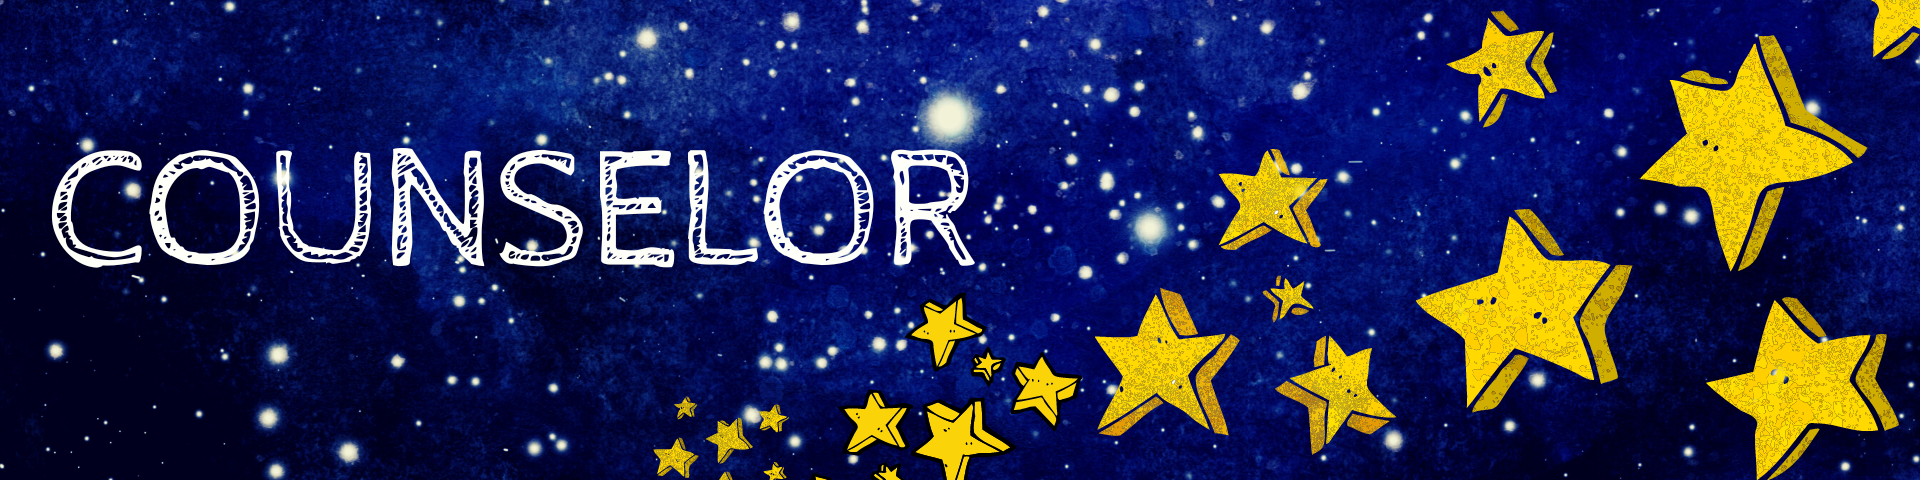 counselor banner with stars